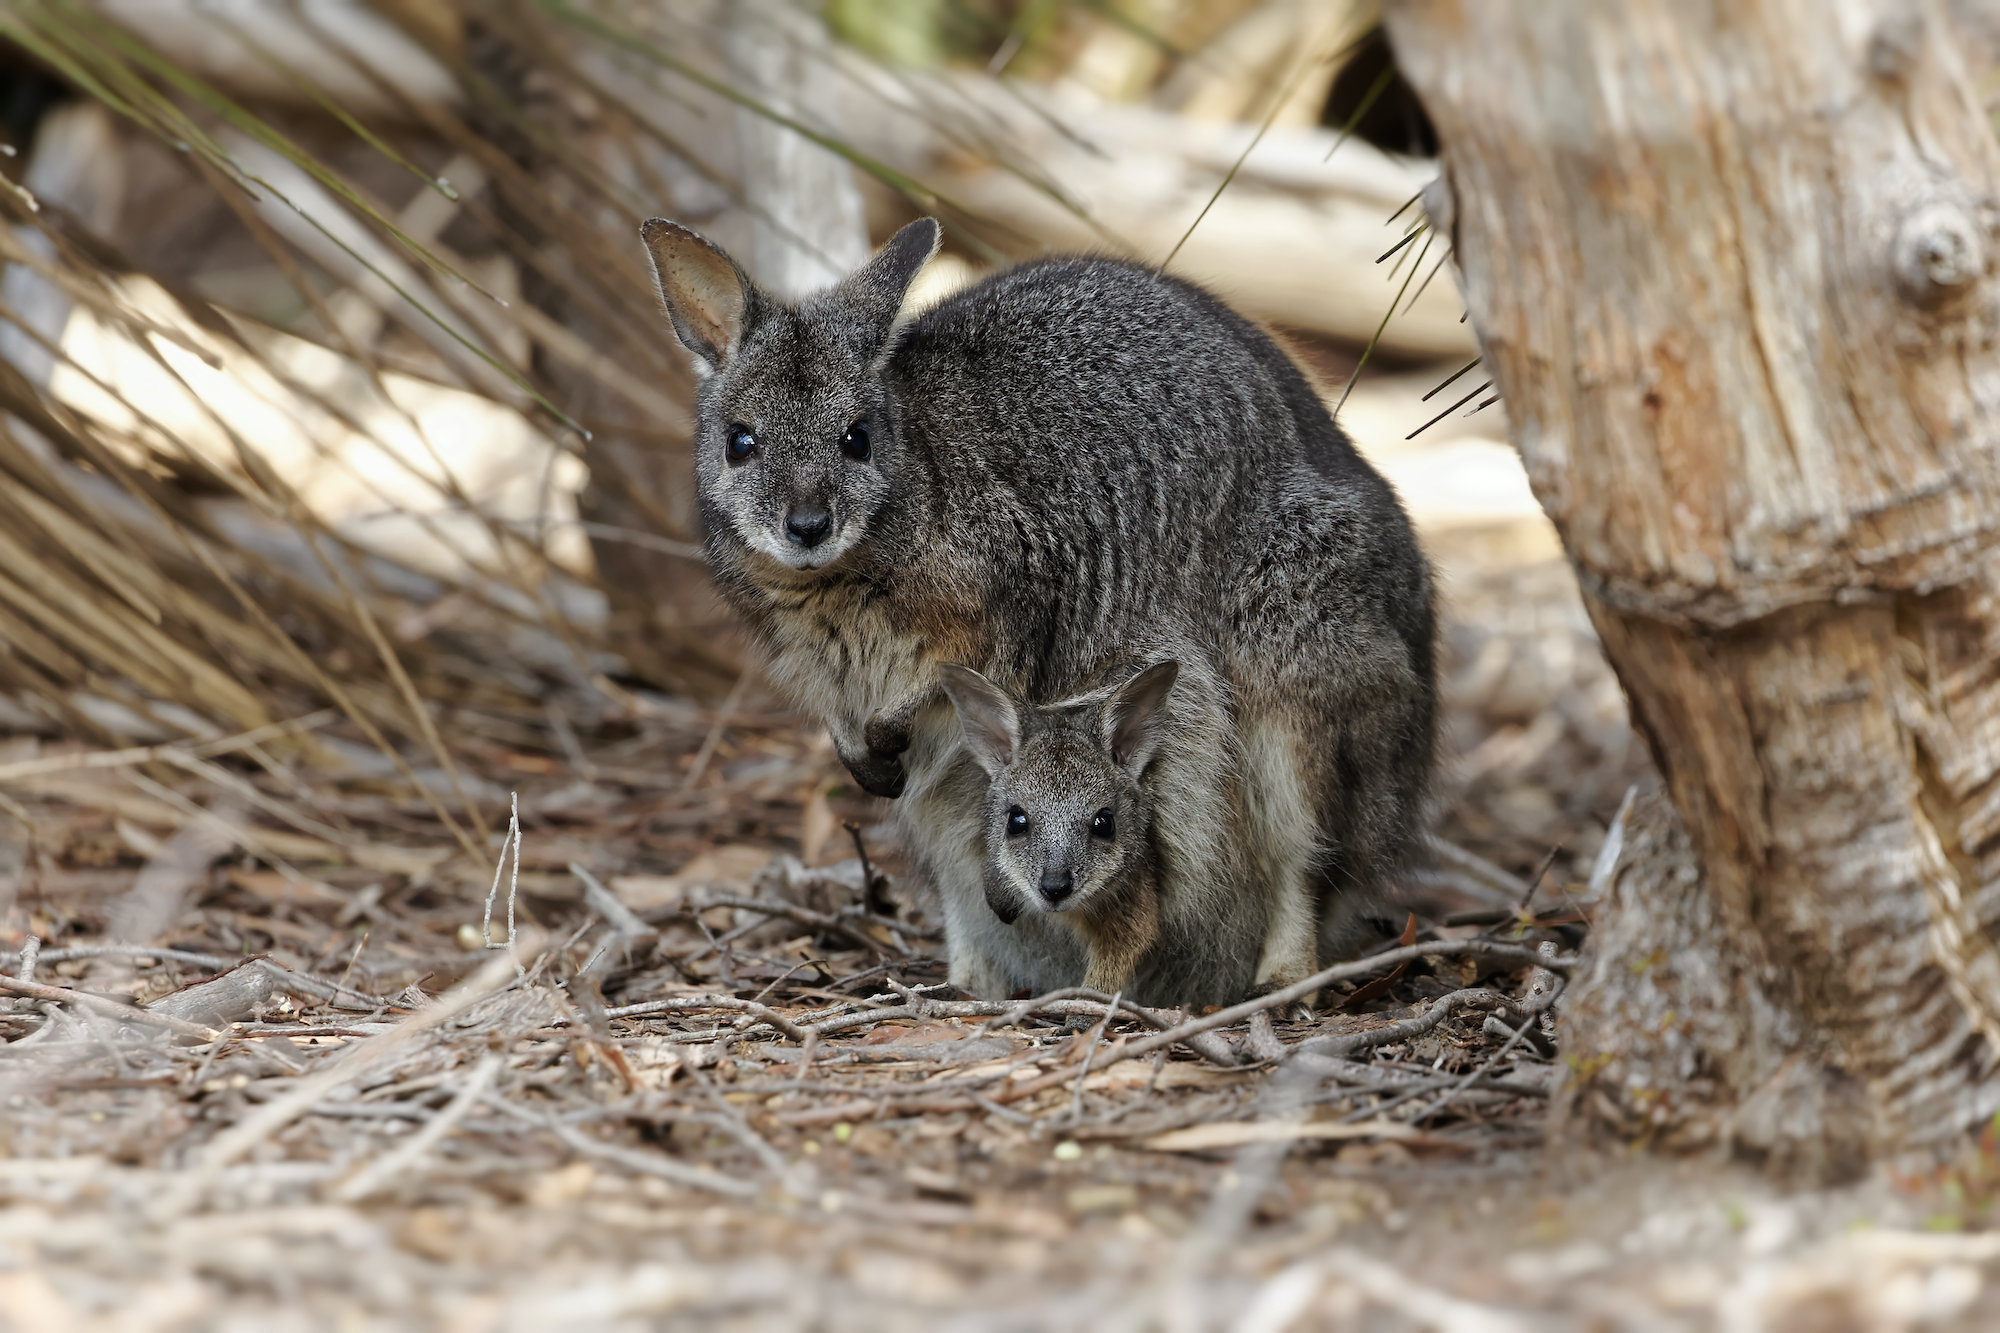 The tammar wallaby is just one Australian species affected by light pollution.